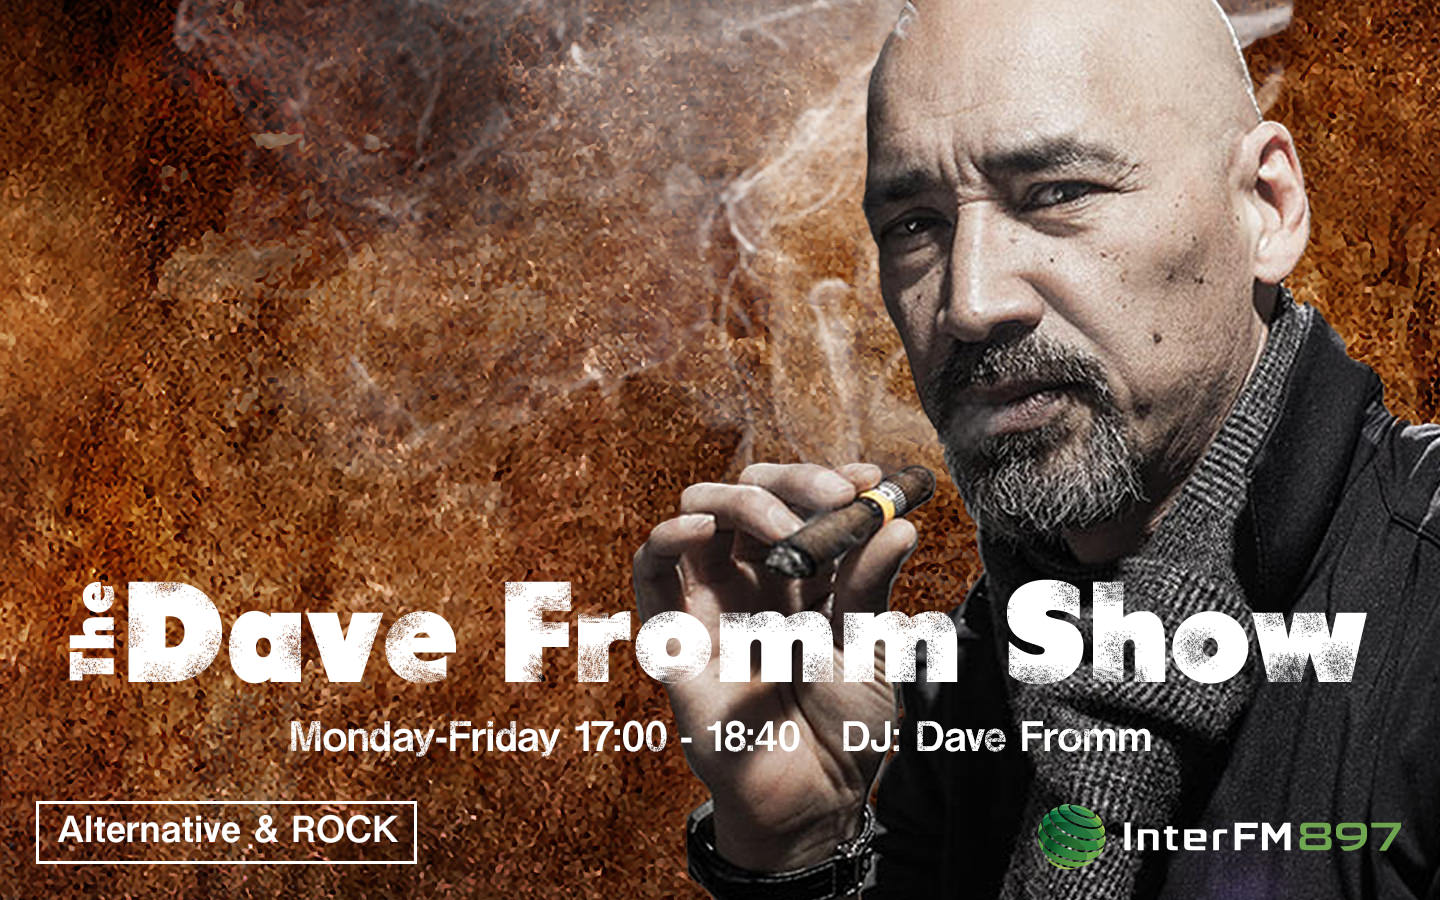 The Dave Fromm Show